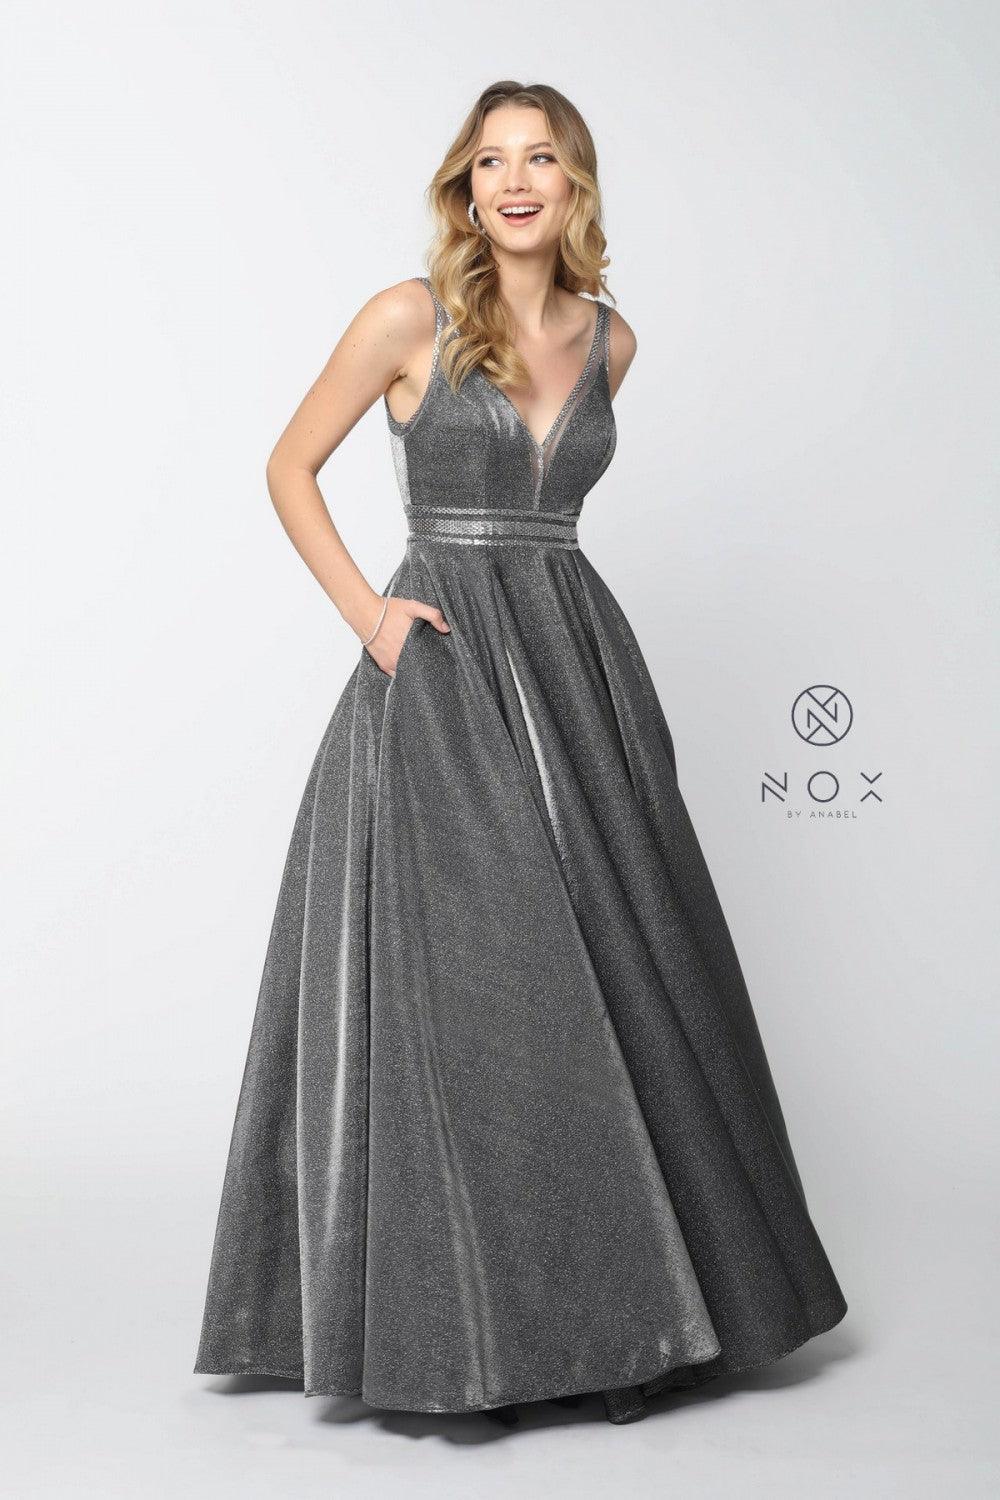 Long Formal Metallic Prom Dress Evening Gown - The Dress Outlet Nox Anabel